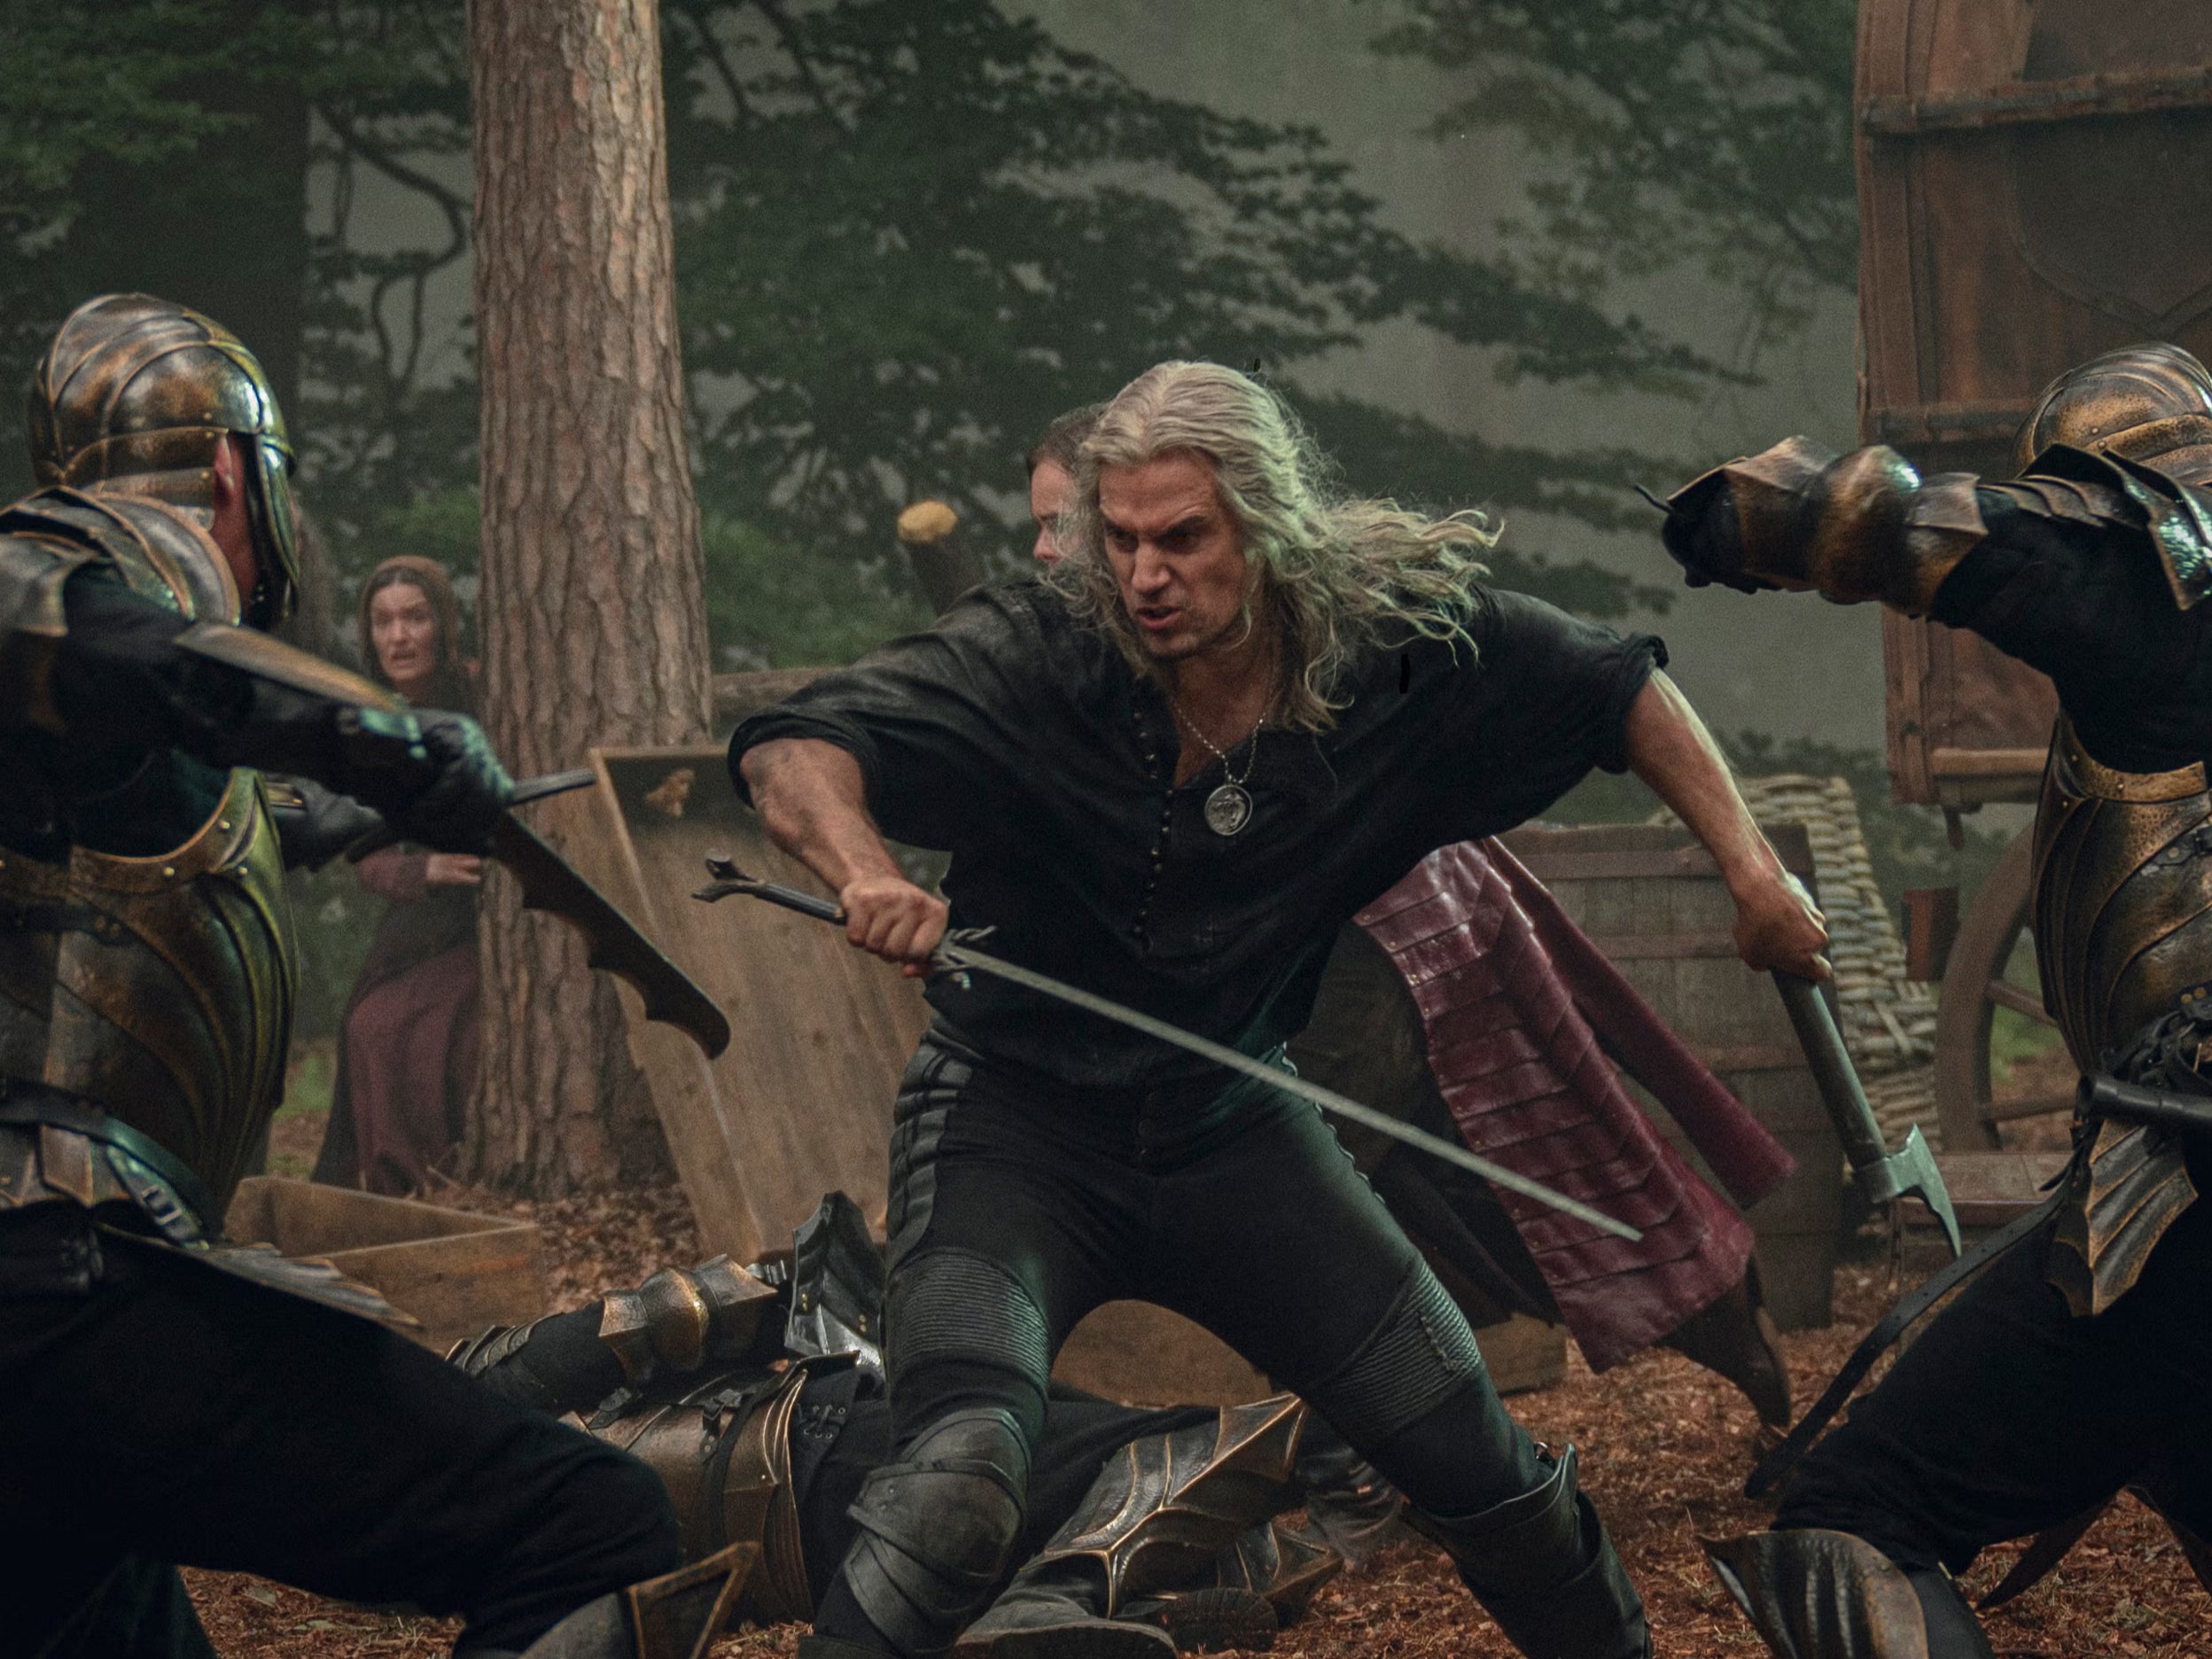 Cavill’s Geralt fights in the latest series of ‘The Witcher’